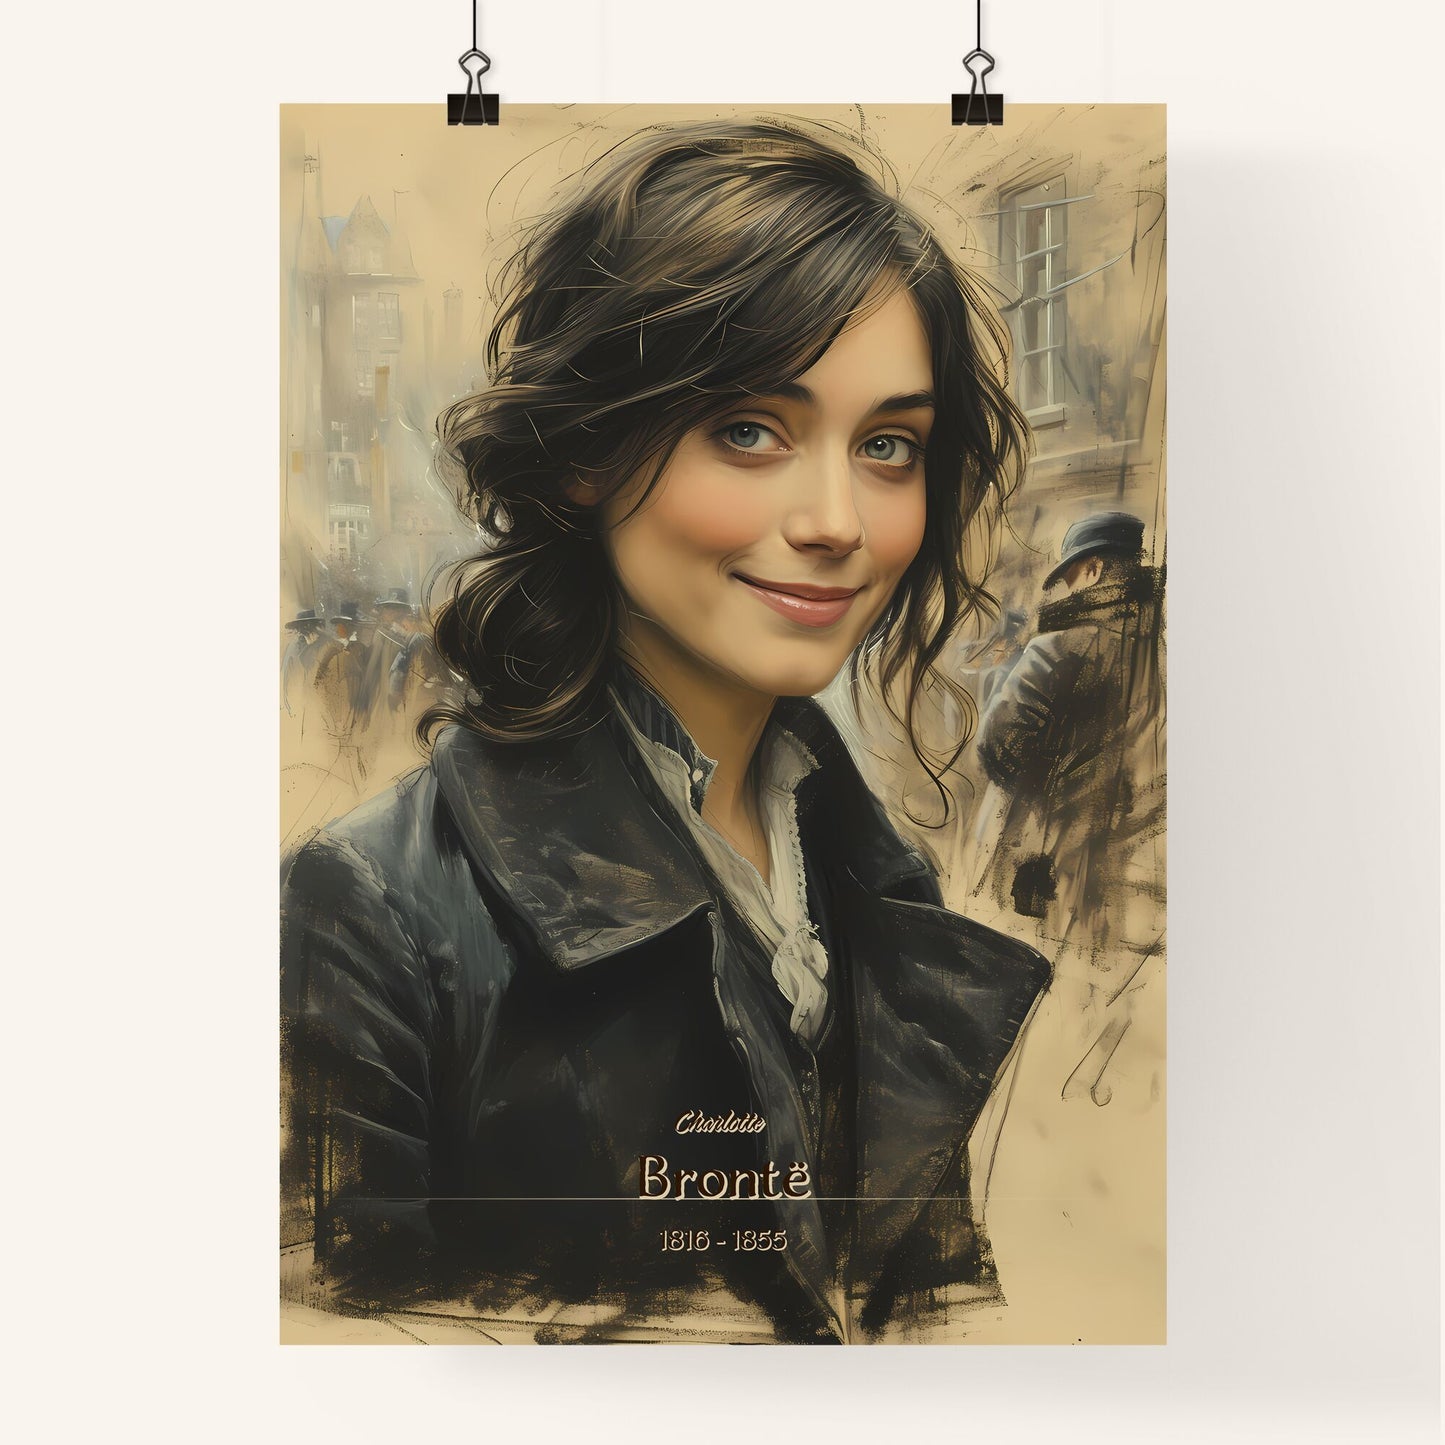 Charlotte, Brontë, 1816 - 1855, A Poster of a woman smiling at the camera Default Title